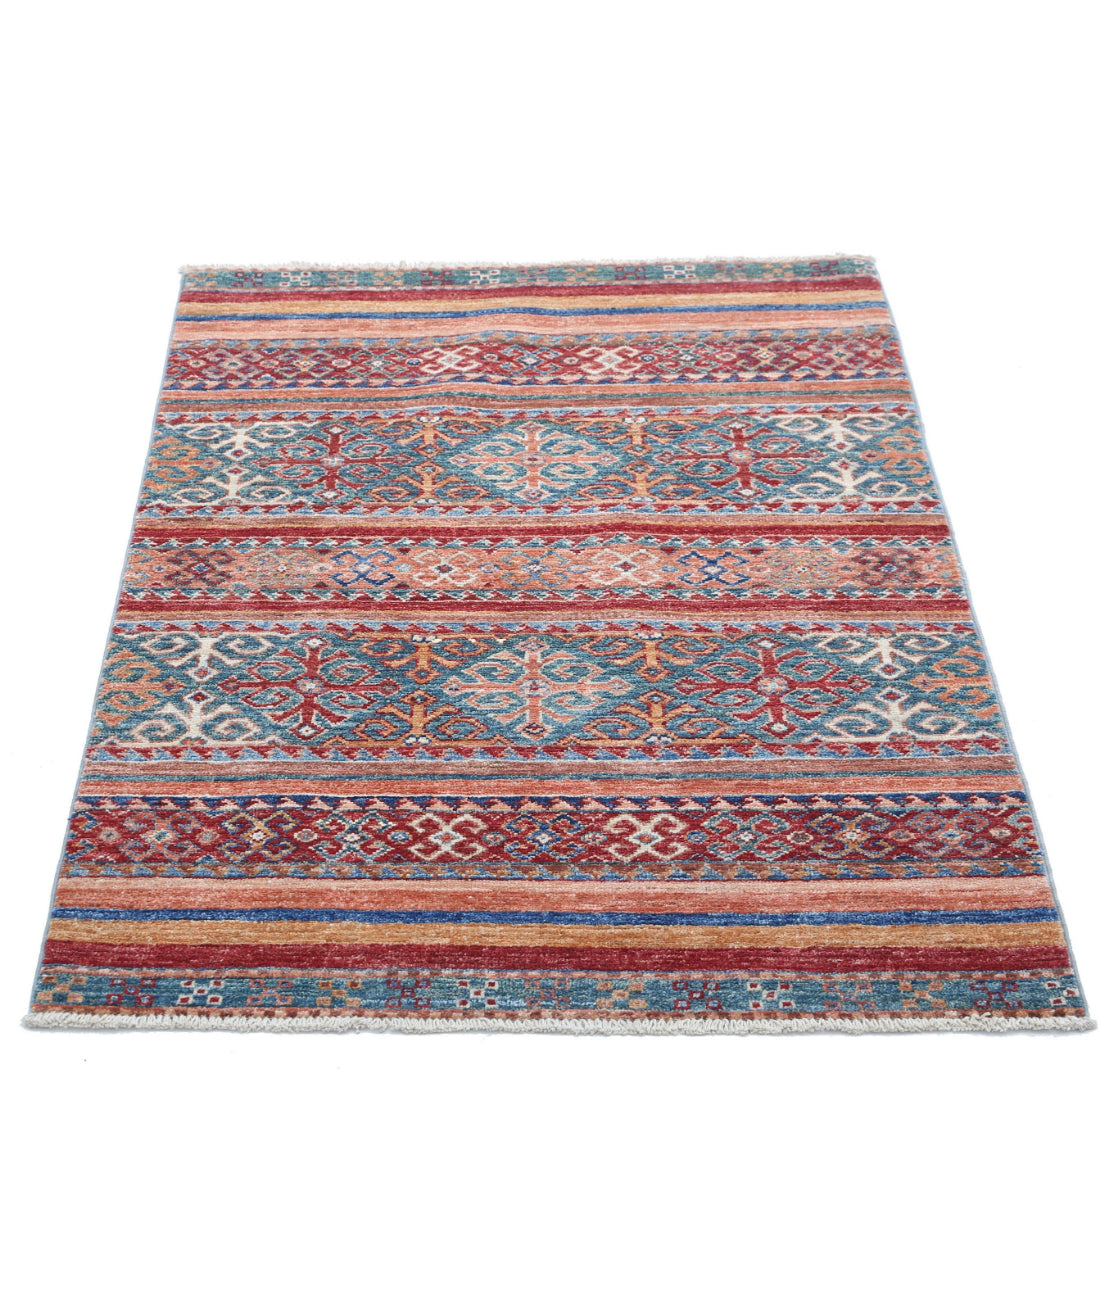 Hand Knotted Khurjeen Wool Rug - 2'8'' x 3'9'' 2'8'' x 3'9'' (80 X 113) / Multi / Multi